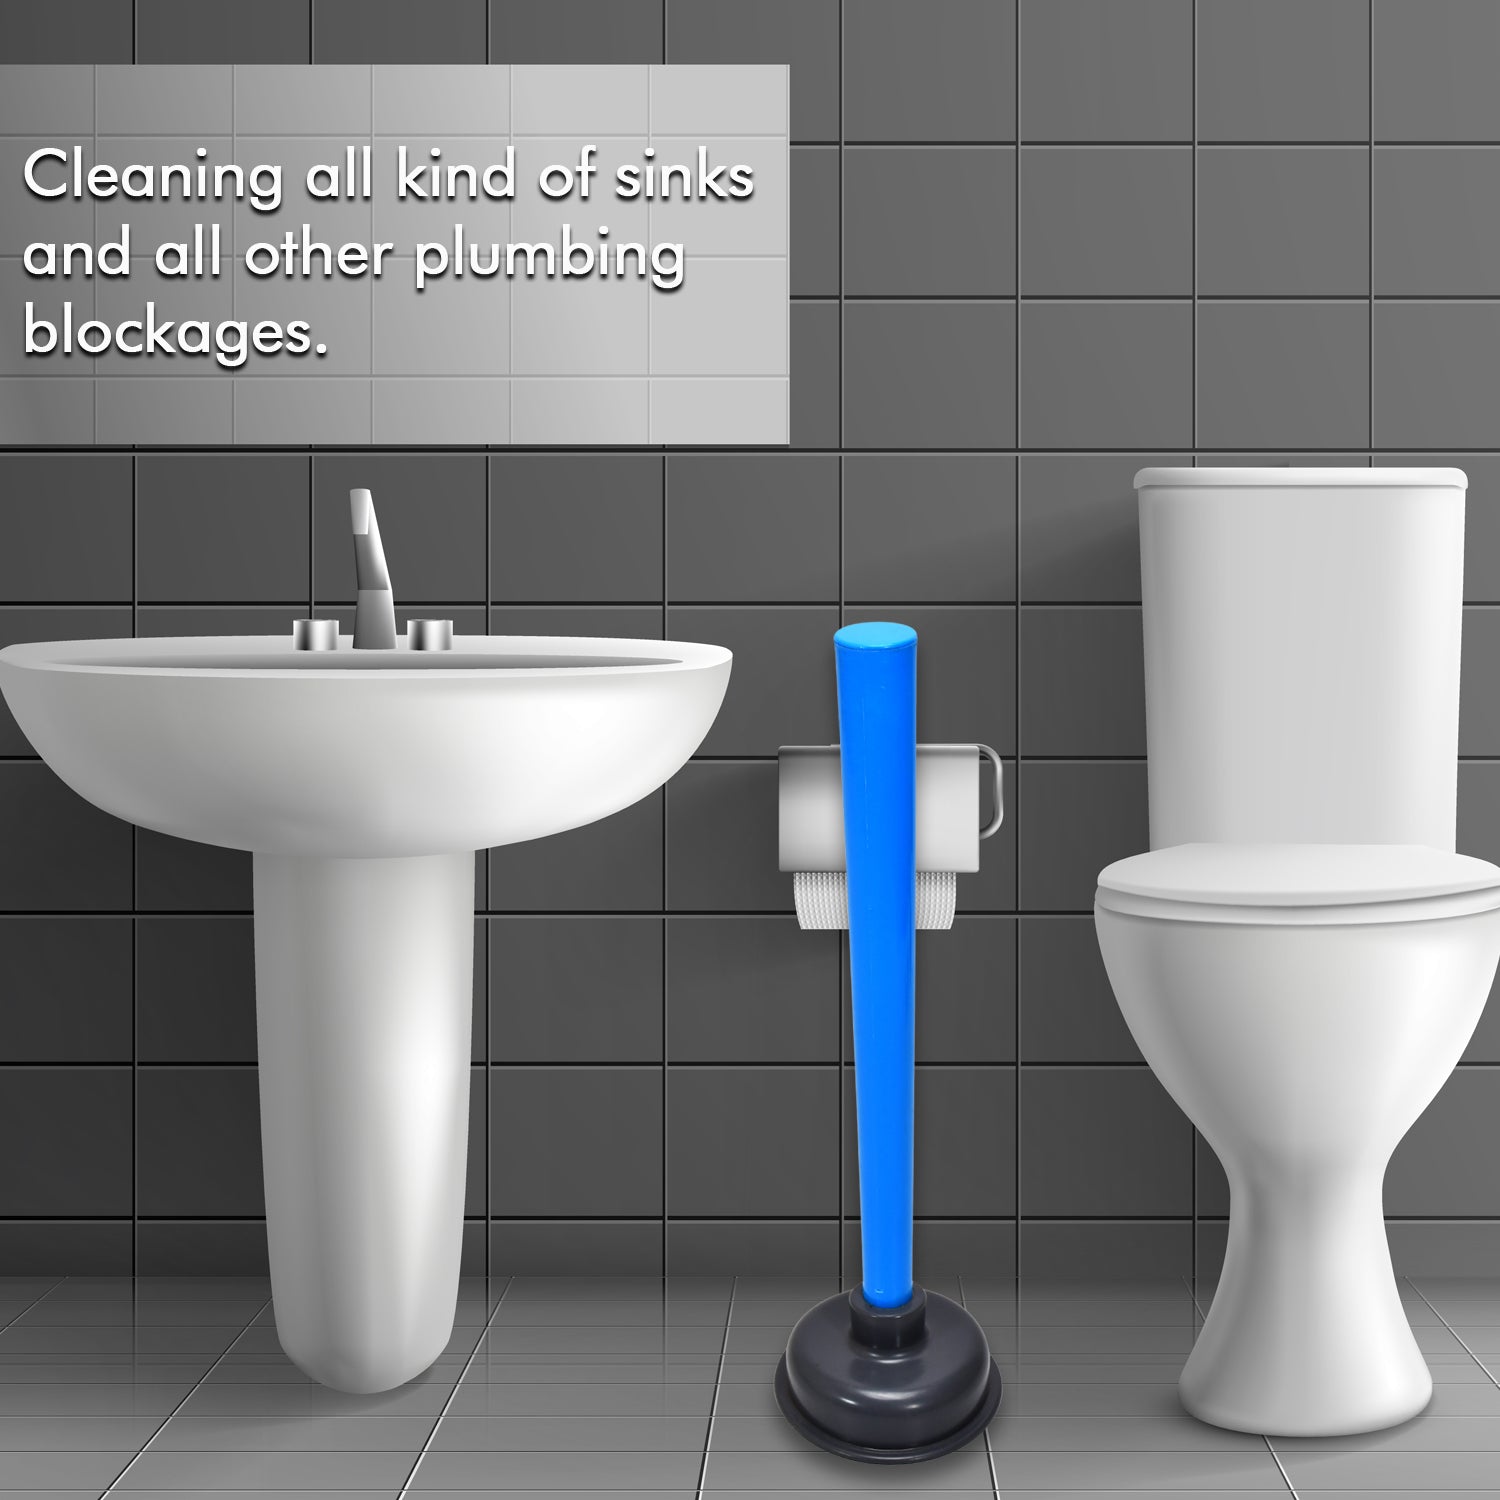 4025 Multifunctional Toilet Plunger, Toilet Blockage Remover Suction Device DeoDap